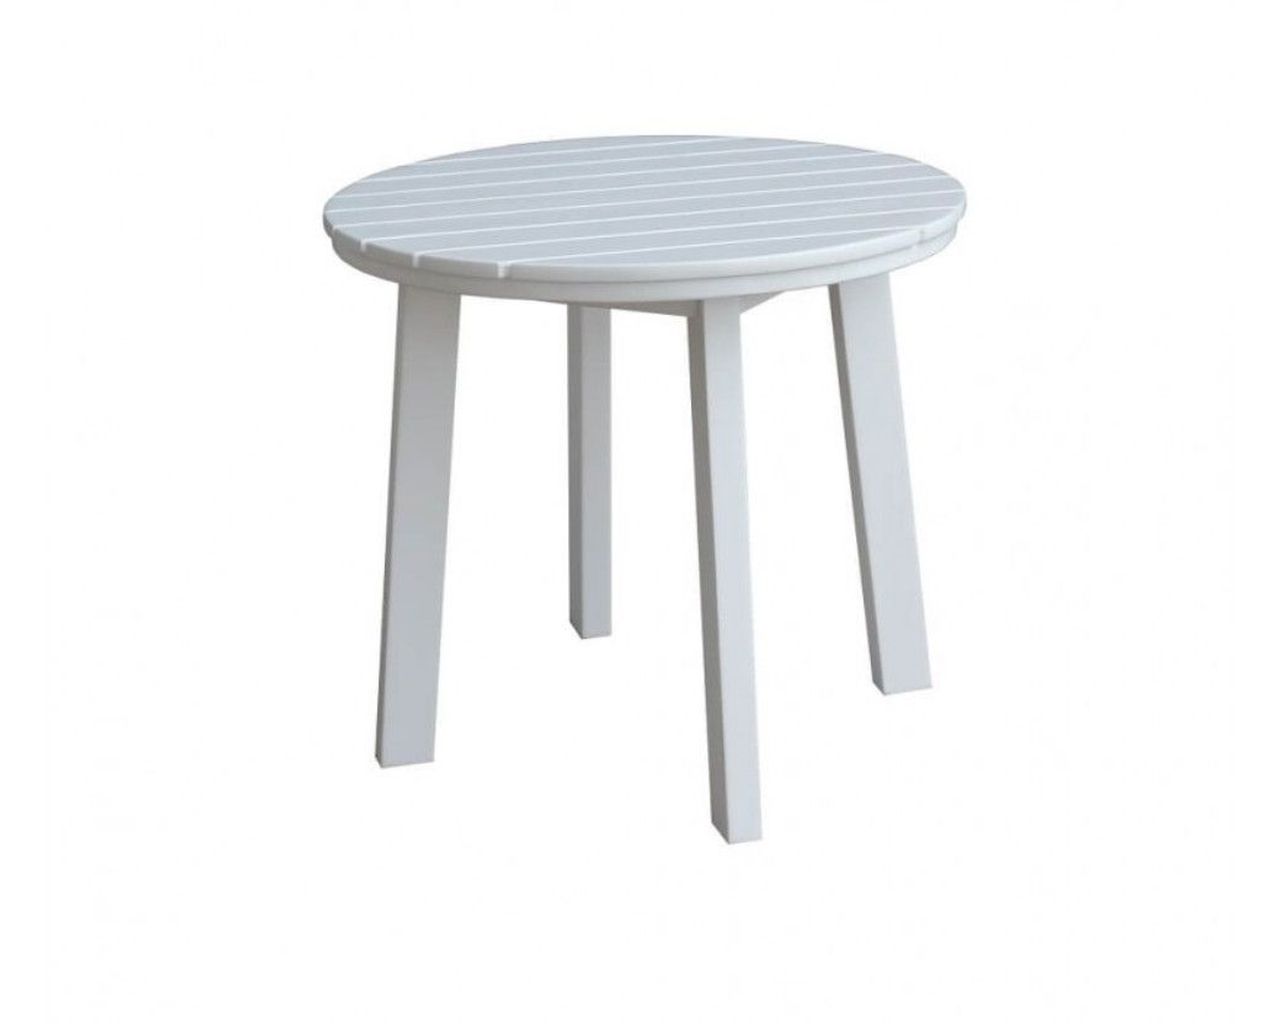 Milly White Painted Timber 45cm Table, , hi-res image number null